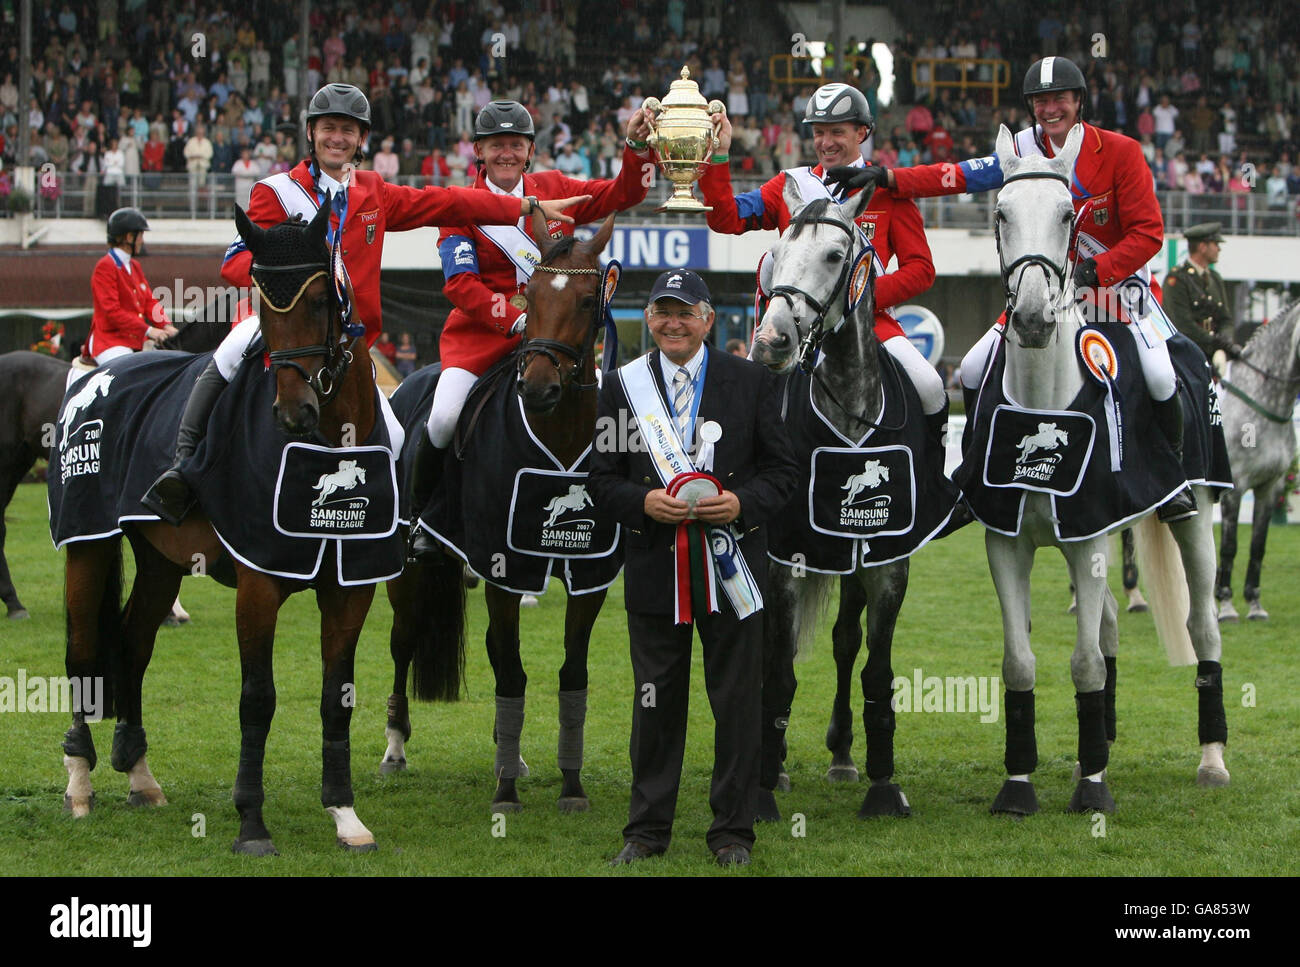 Germany's Chef d'Equipe Sonke Sonksen (front) and team (left to right) Thomas Muhlbauer, Engemann Hermann, Holger Wulschner and Thomas Voss hold up the Aga Khan Challenge trophy at the Dublin Horse Show at the RDS, Dublin. Stock Photo